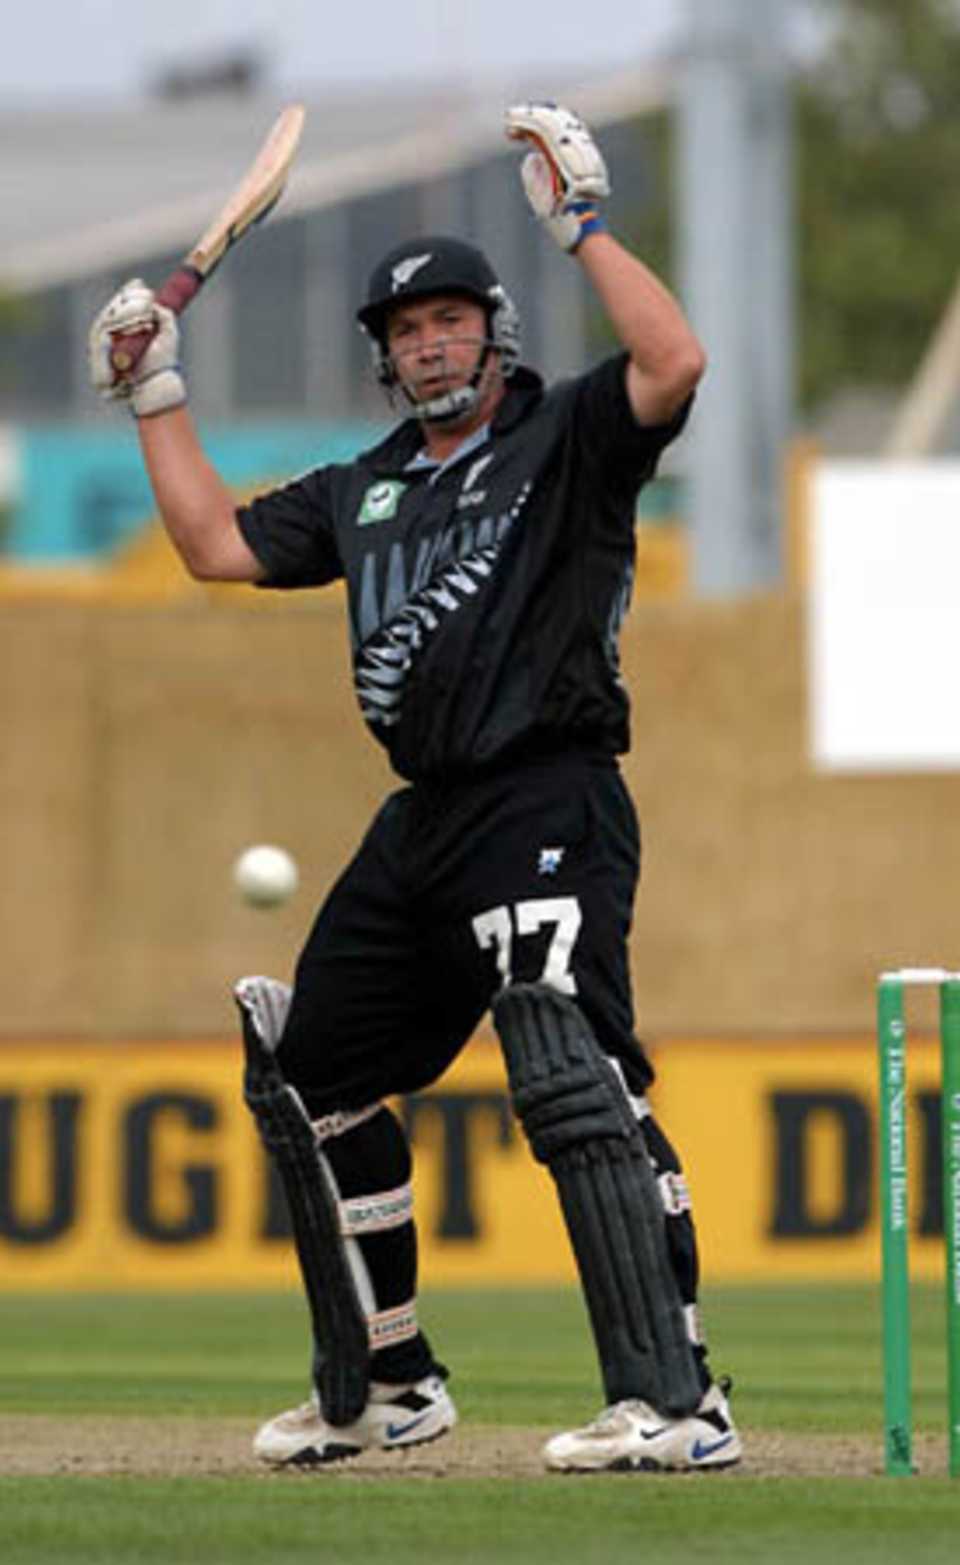 New Zealand batsman Roger Twose gets off the mark after 15 balls in awkward fashion, after failing to raise his bat out of the line of a ball from Pakistan opening bowler Wasim Akram in time, deflecting it down to third man. Twose went on to score 42. 4th One-Day International: New Zealand v Pakistan at Jade Stadium, Christchurch, 25 February 2001.